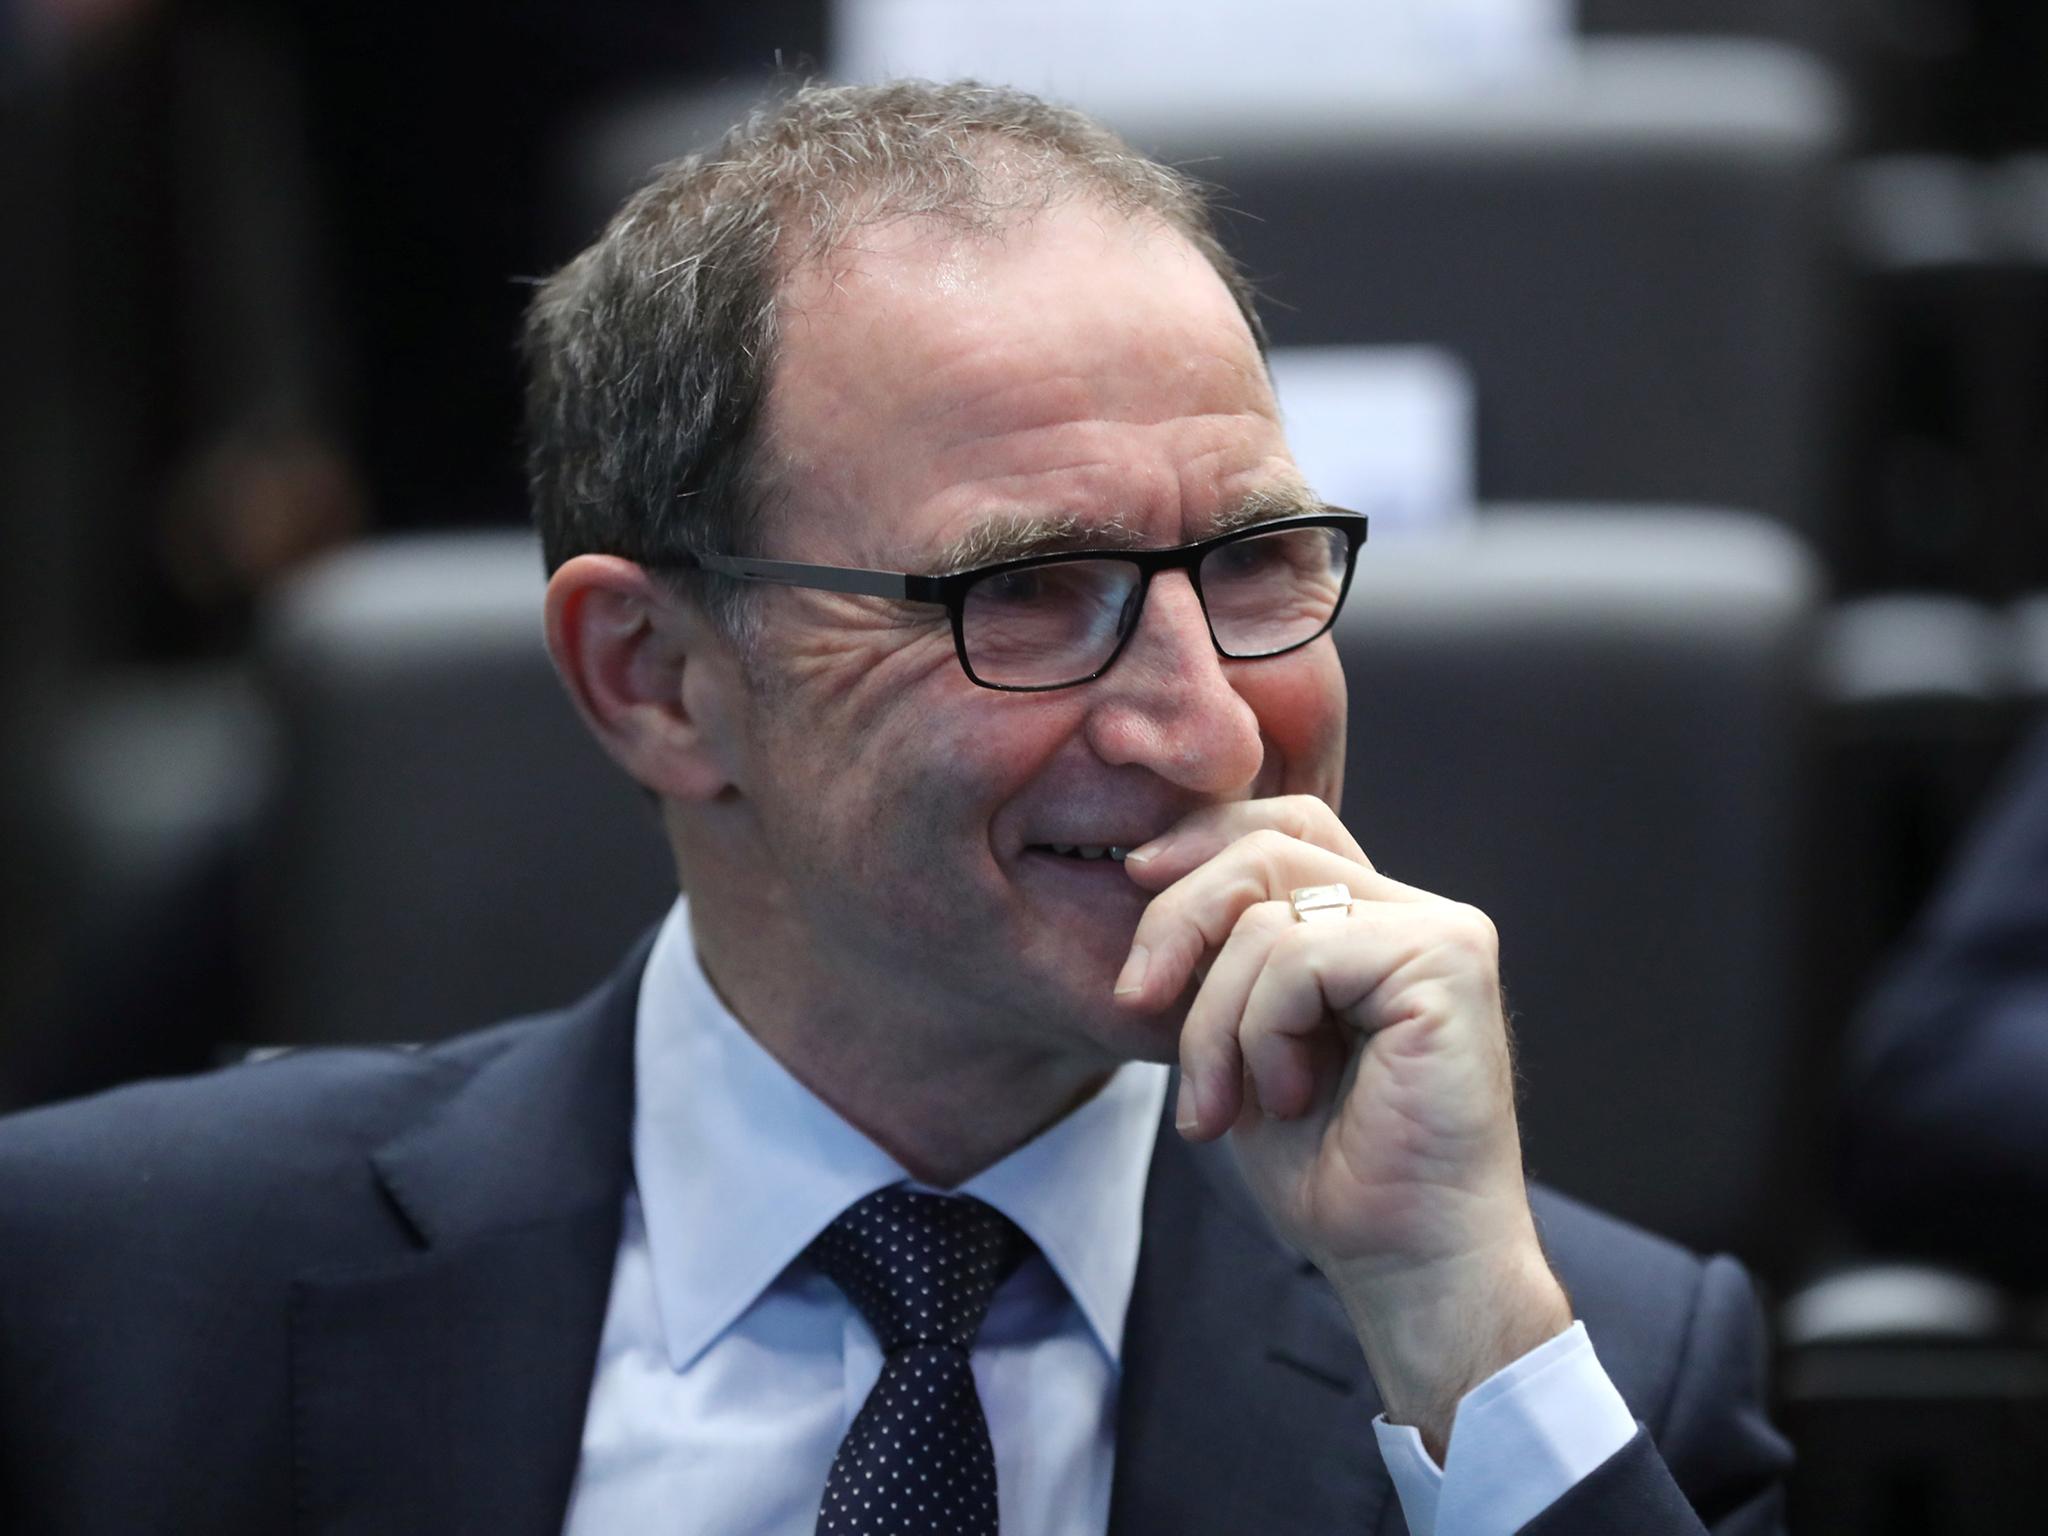 Republic of Ireland manager Martin O'Neill smiles after being drawn against Denmark in the 2018 World Cup play-offs